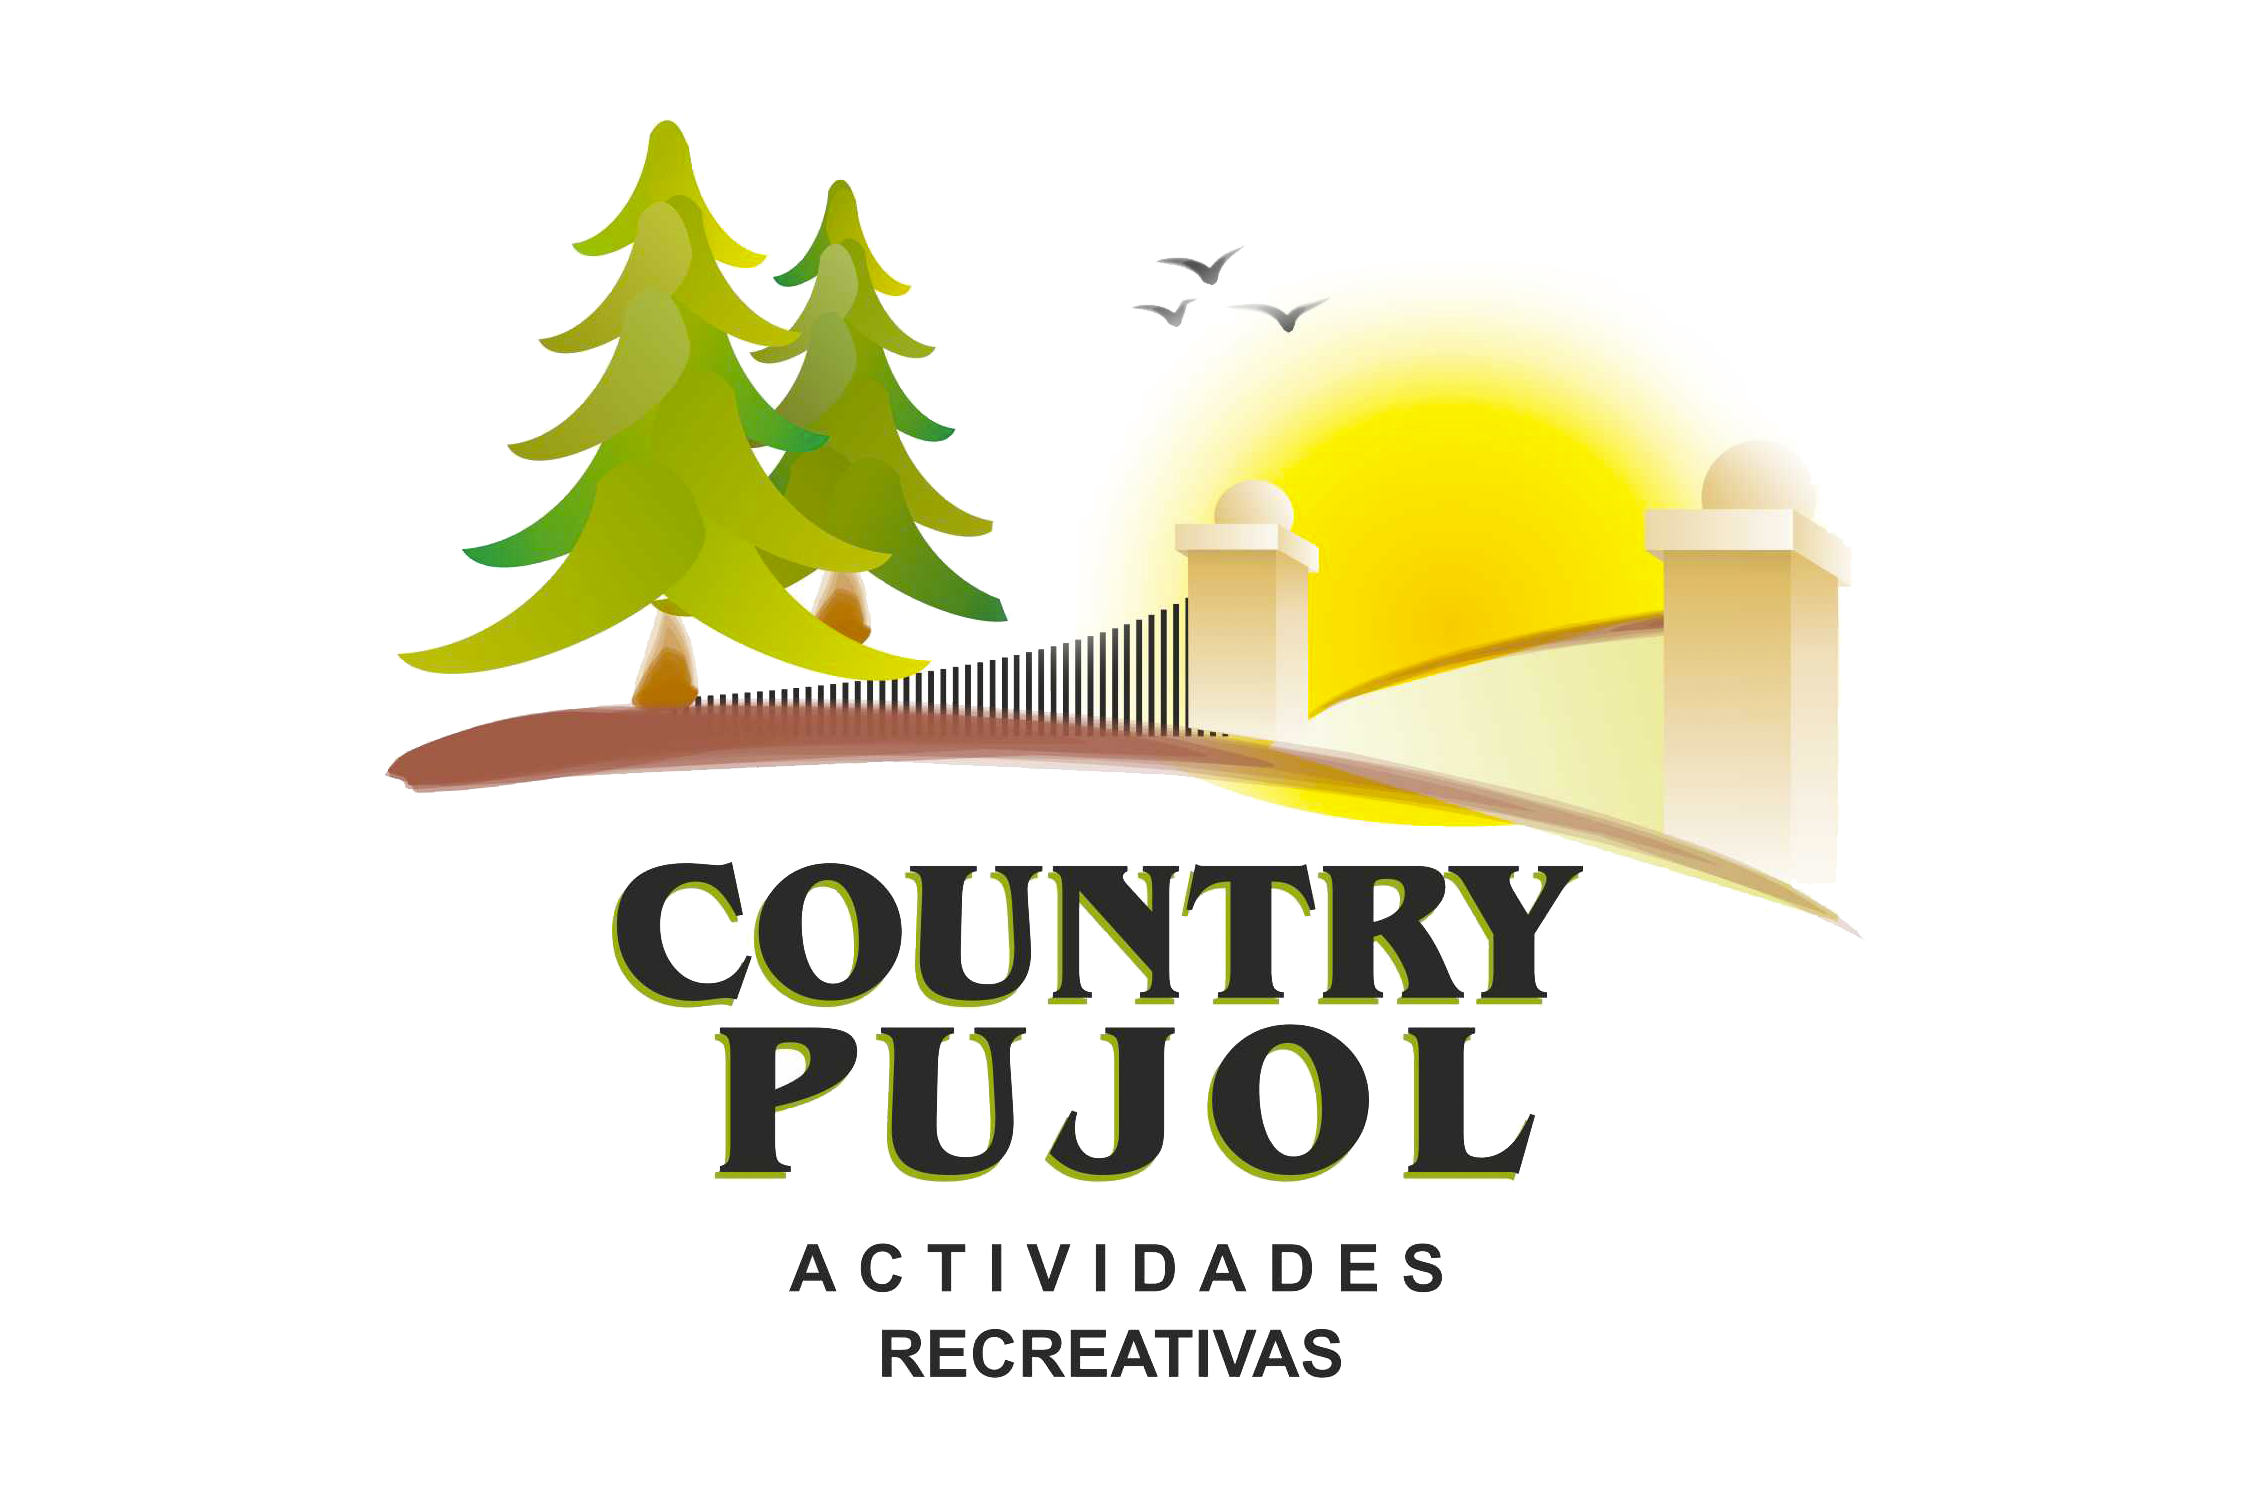 Country Pujol